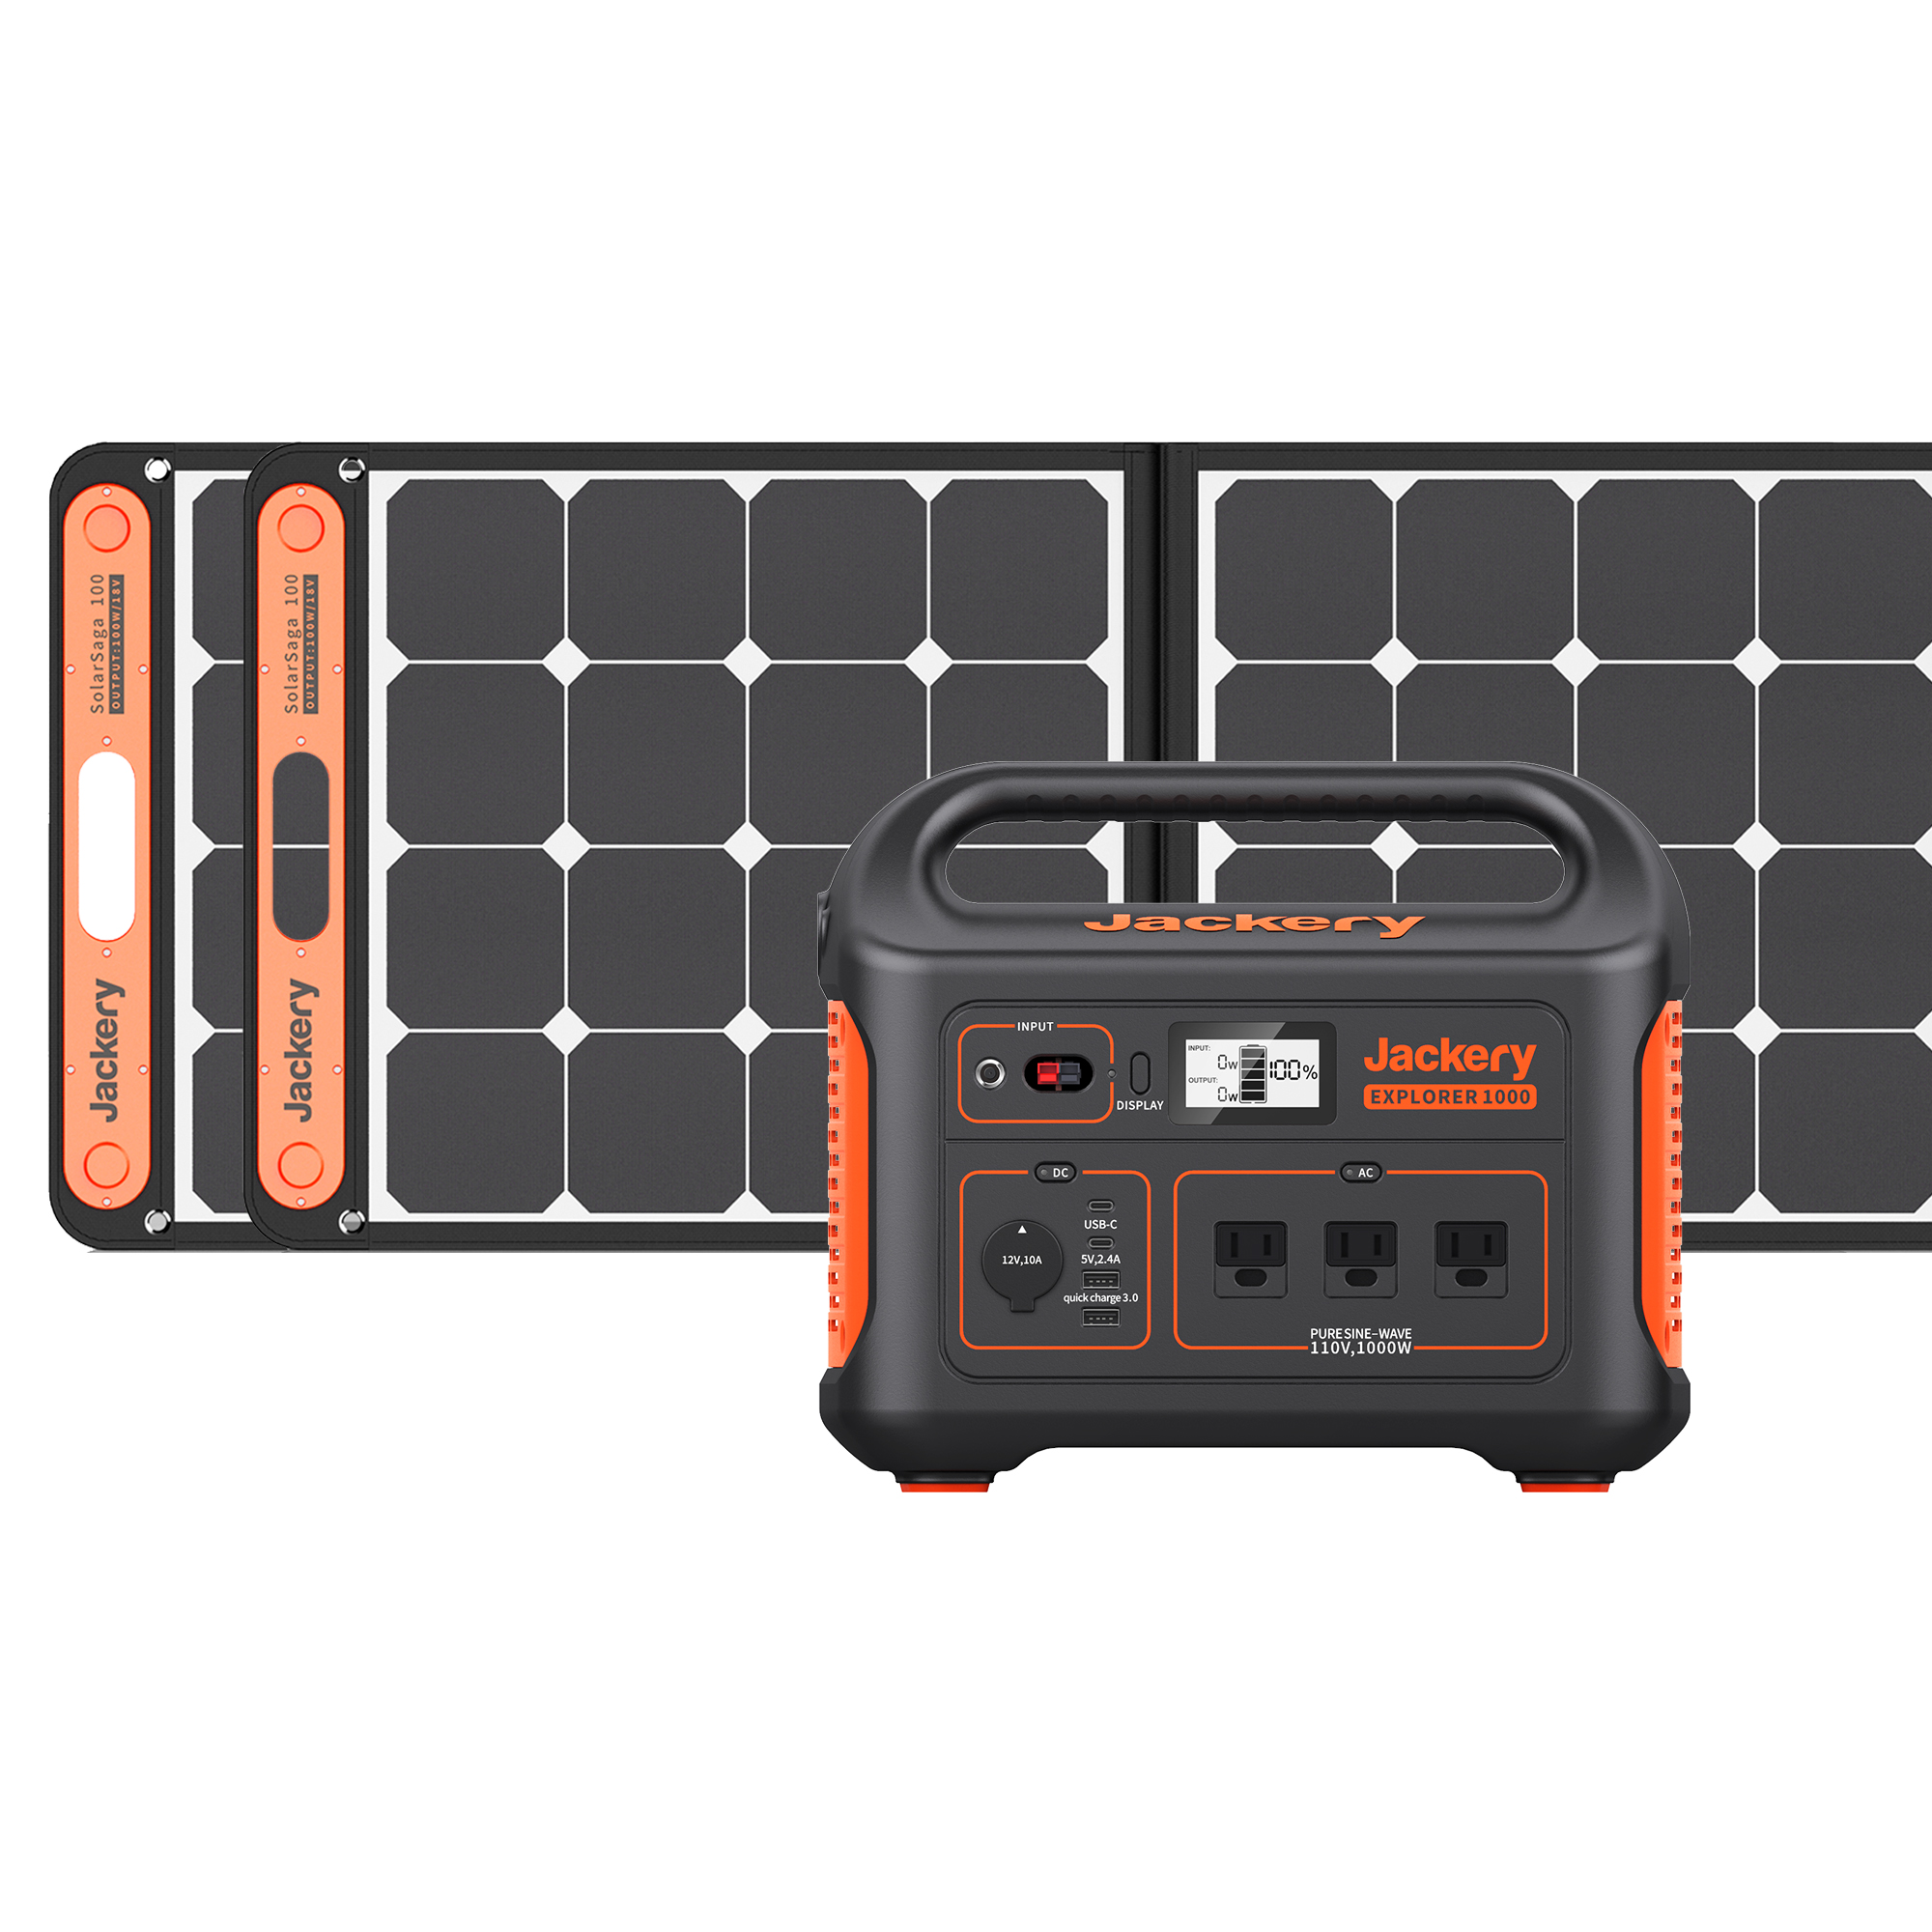 Jackery Explorer 1500 Portable Power Station $1189.30 and Jackery Explorer 300 Portable Power Station $210 + Free Shipping